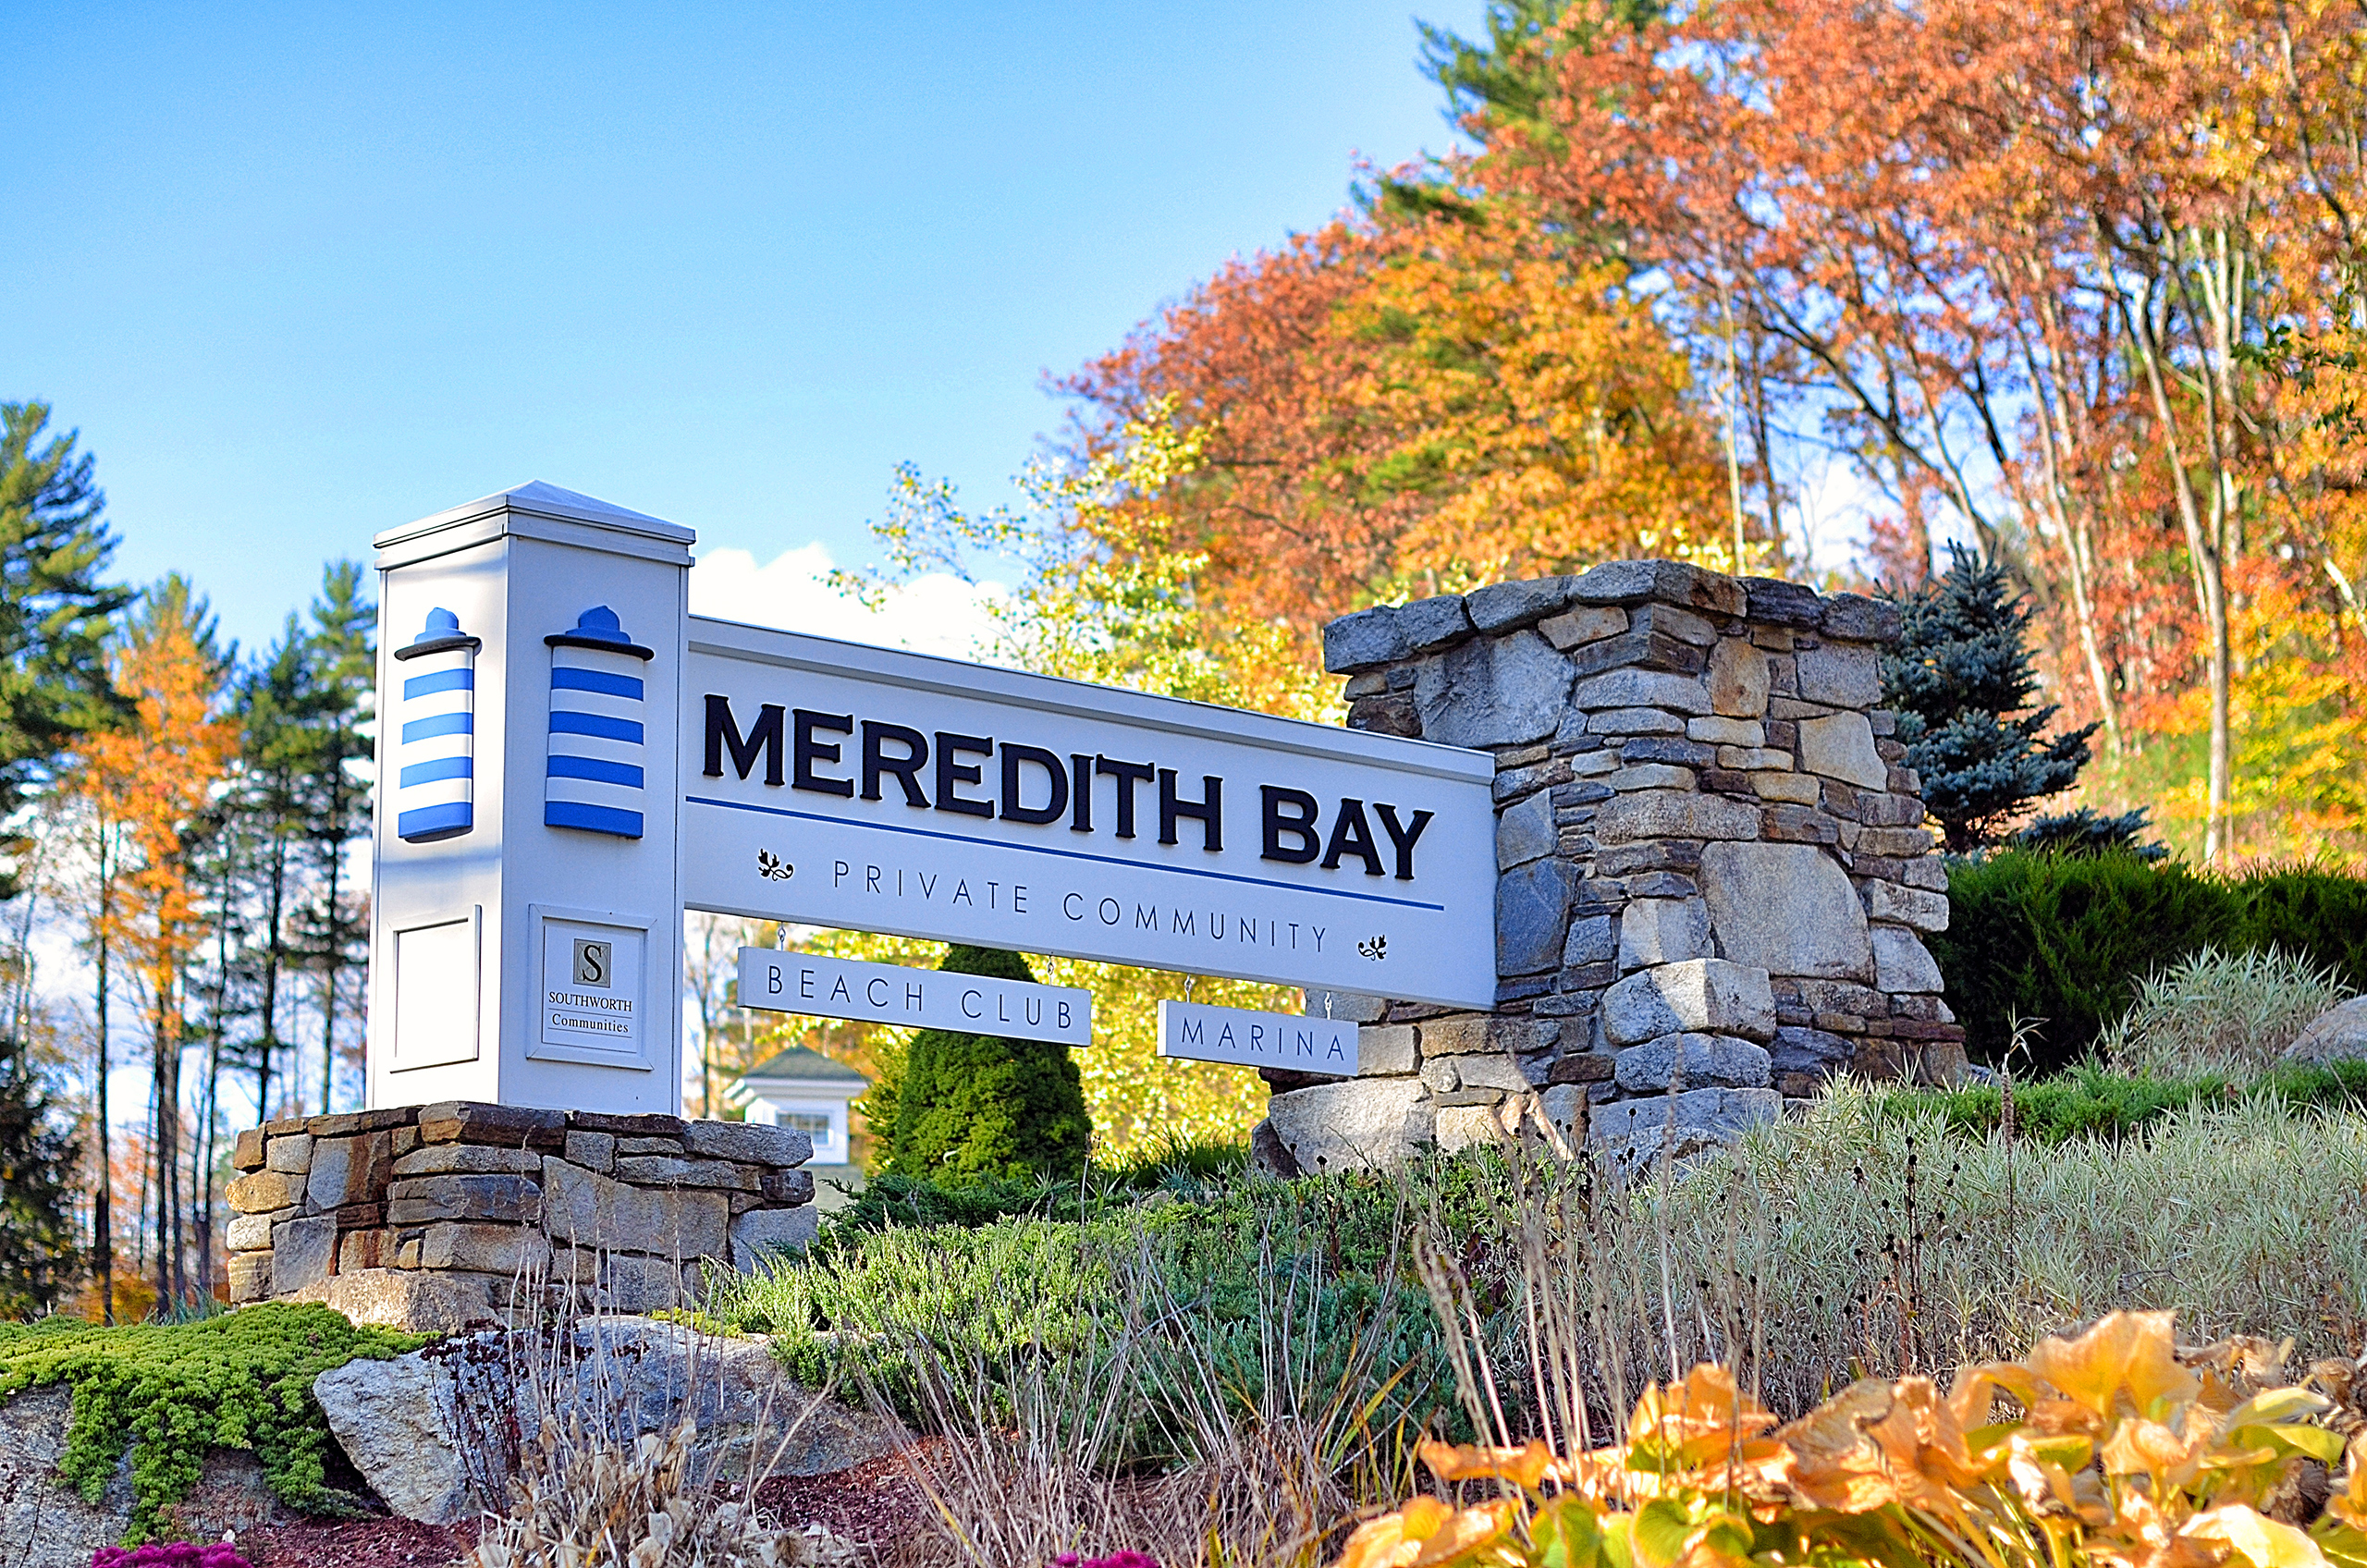 Meredith Bay Private Community image